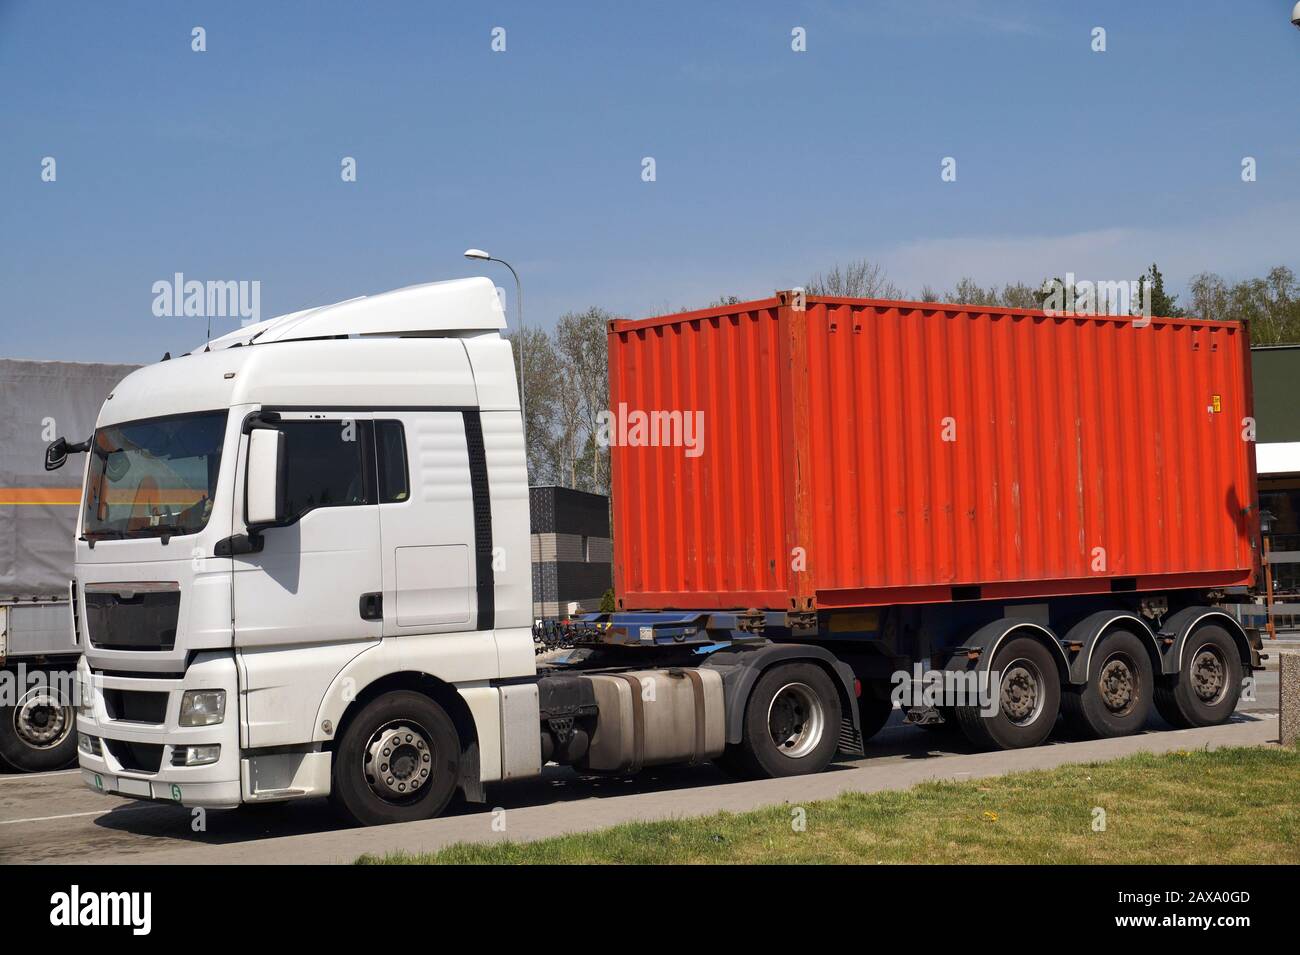 Transport by container truck. Truck in the parking lot during a travel break. Stock Photo